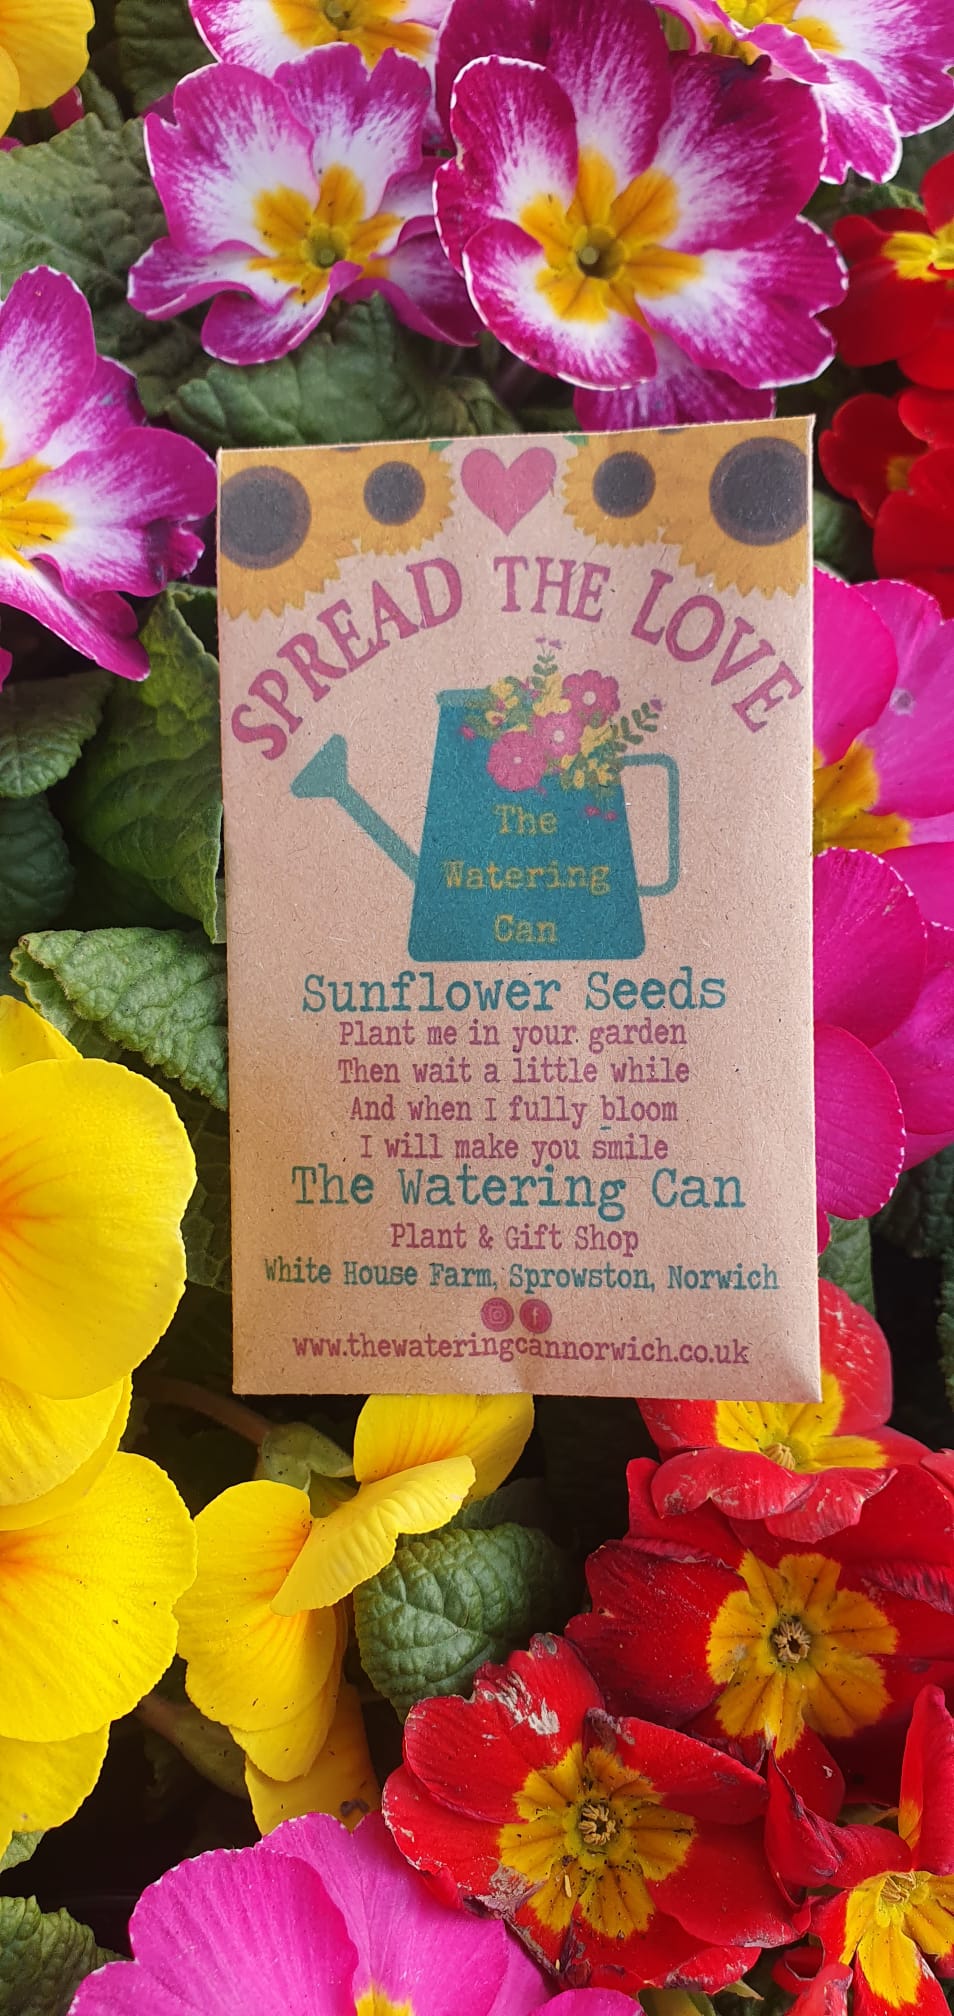 Spread the love  Sunflower Seeds - ideal for wedding favours!